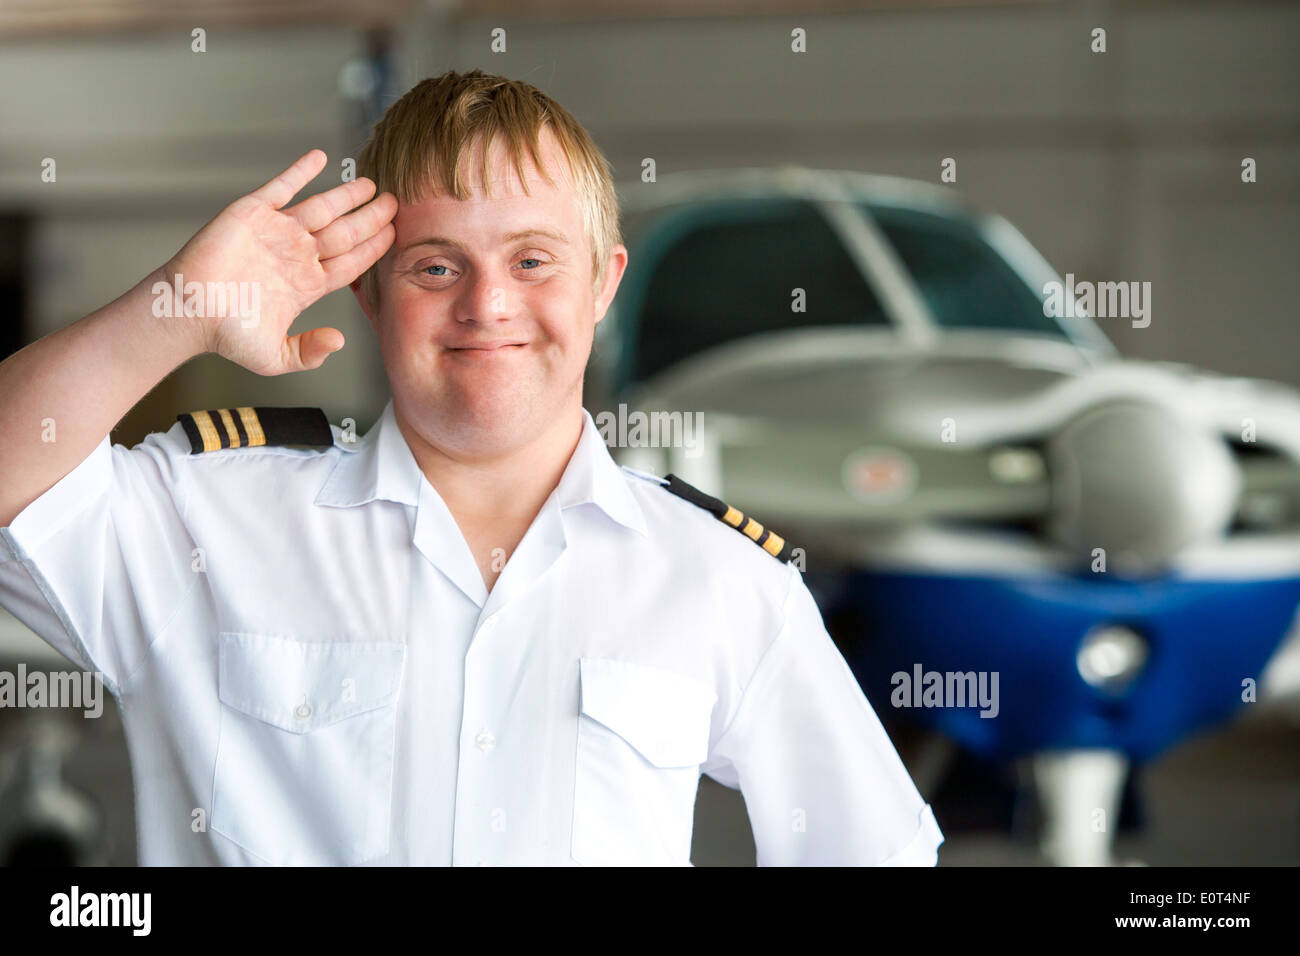 Portrait of young pilot with down syndrome in hangar. Stock Photo